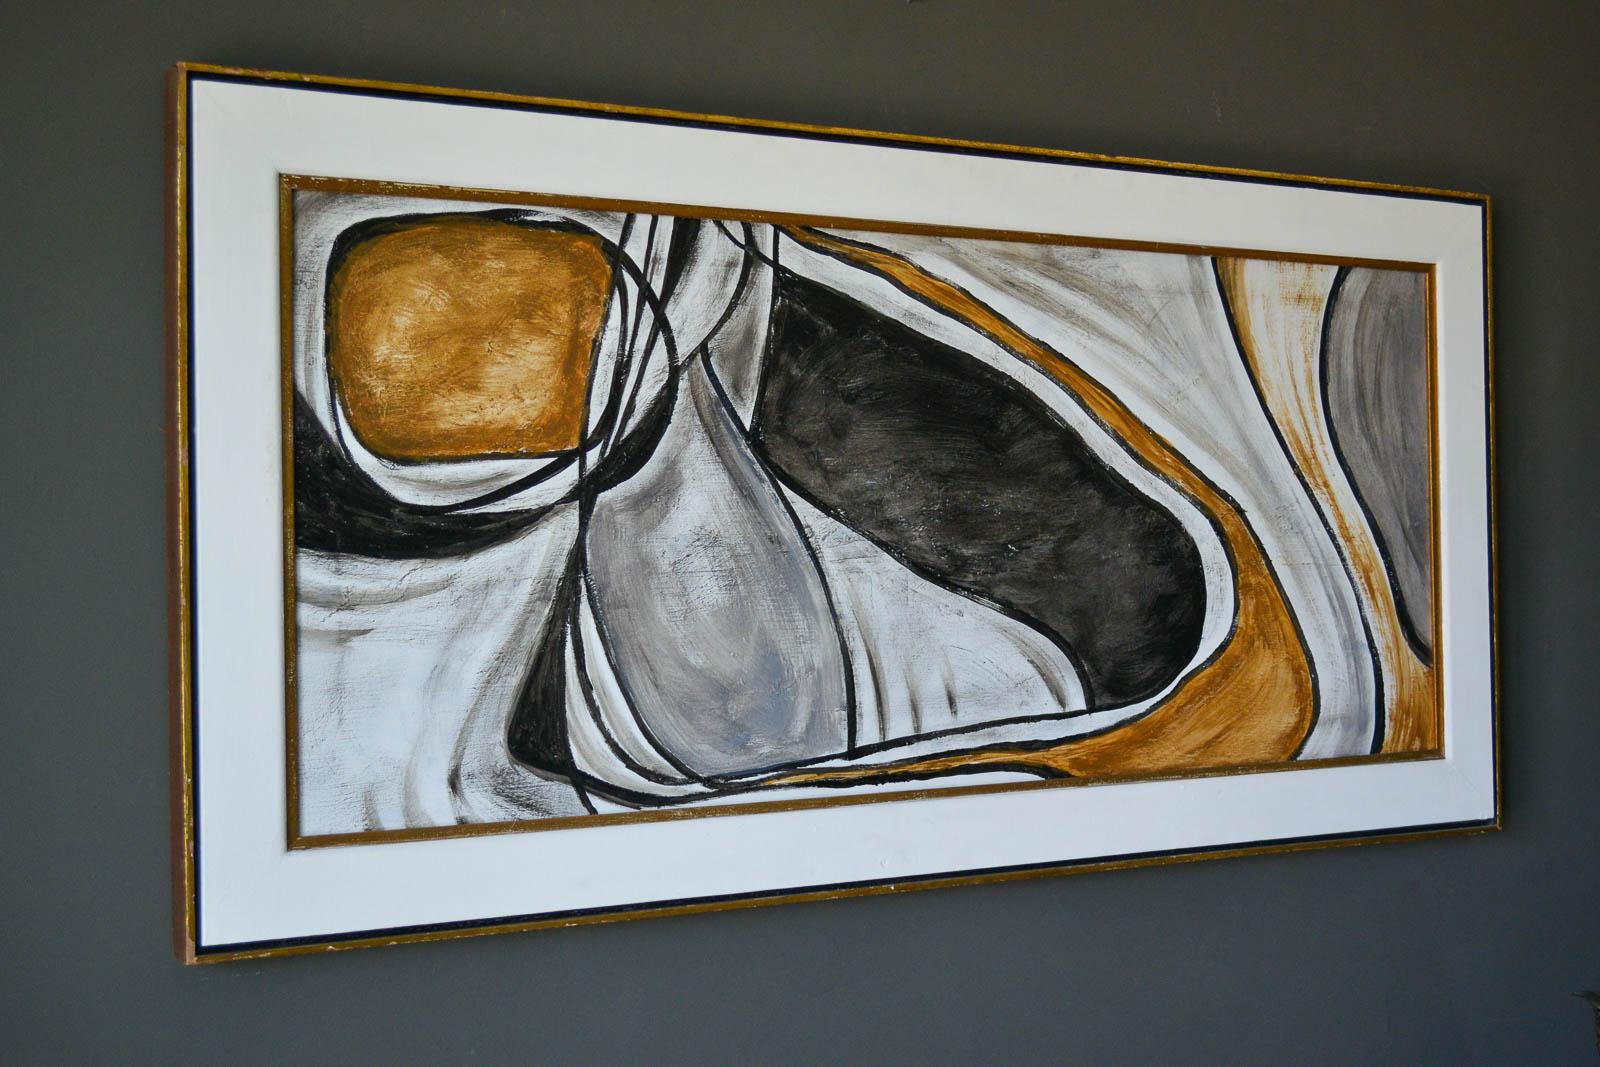 Original oil on canvas abstract vintage Mid-Century Modern painting. Beautifully framed with linen matt and gold trim. Nice color palette. Unsigned.

Measures 54.5